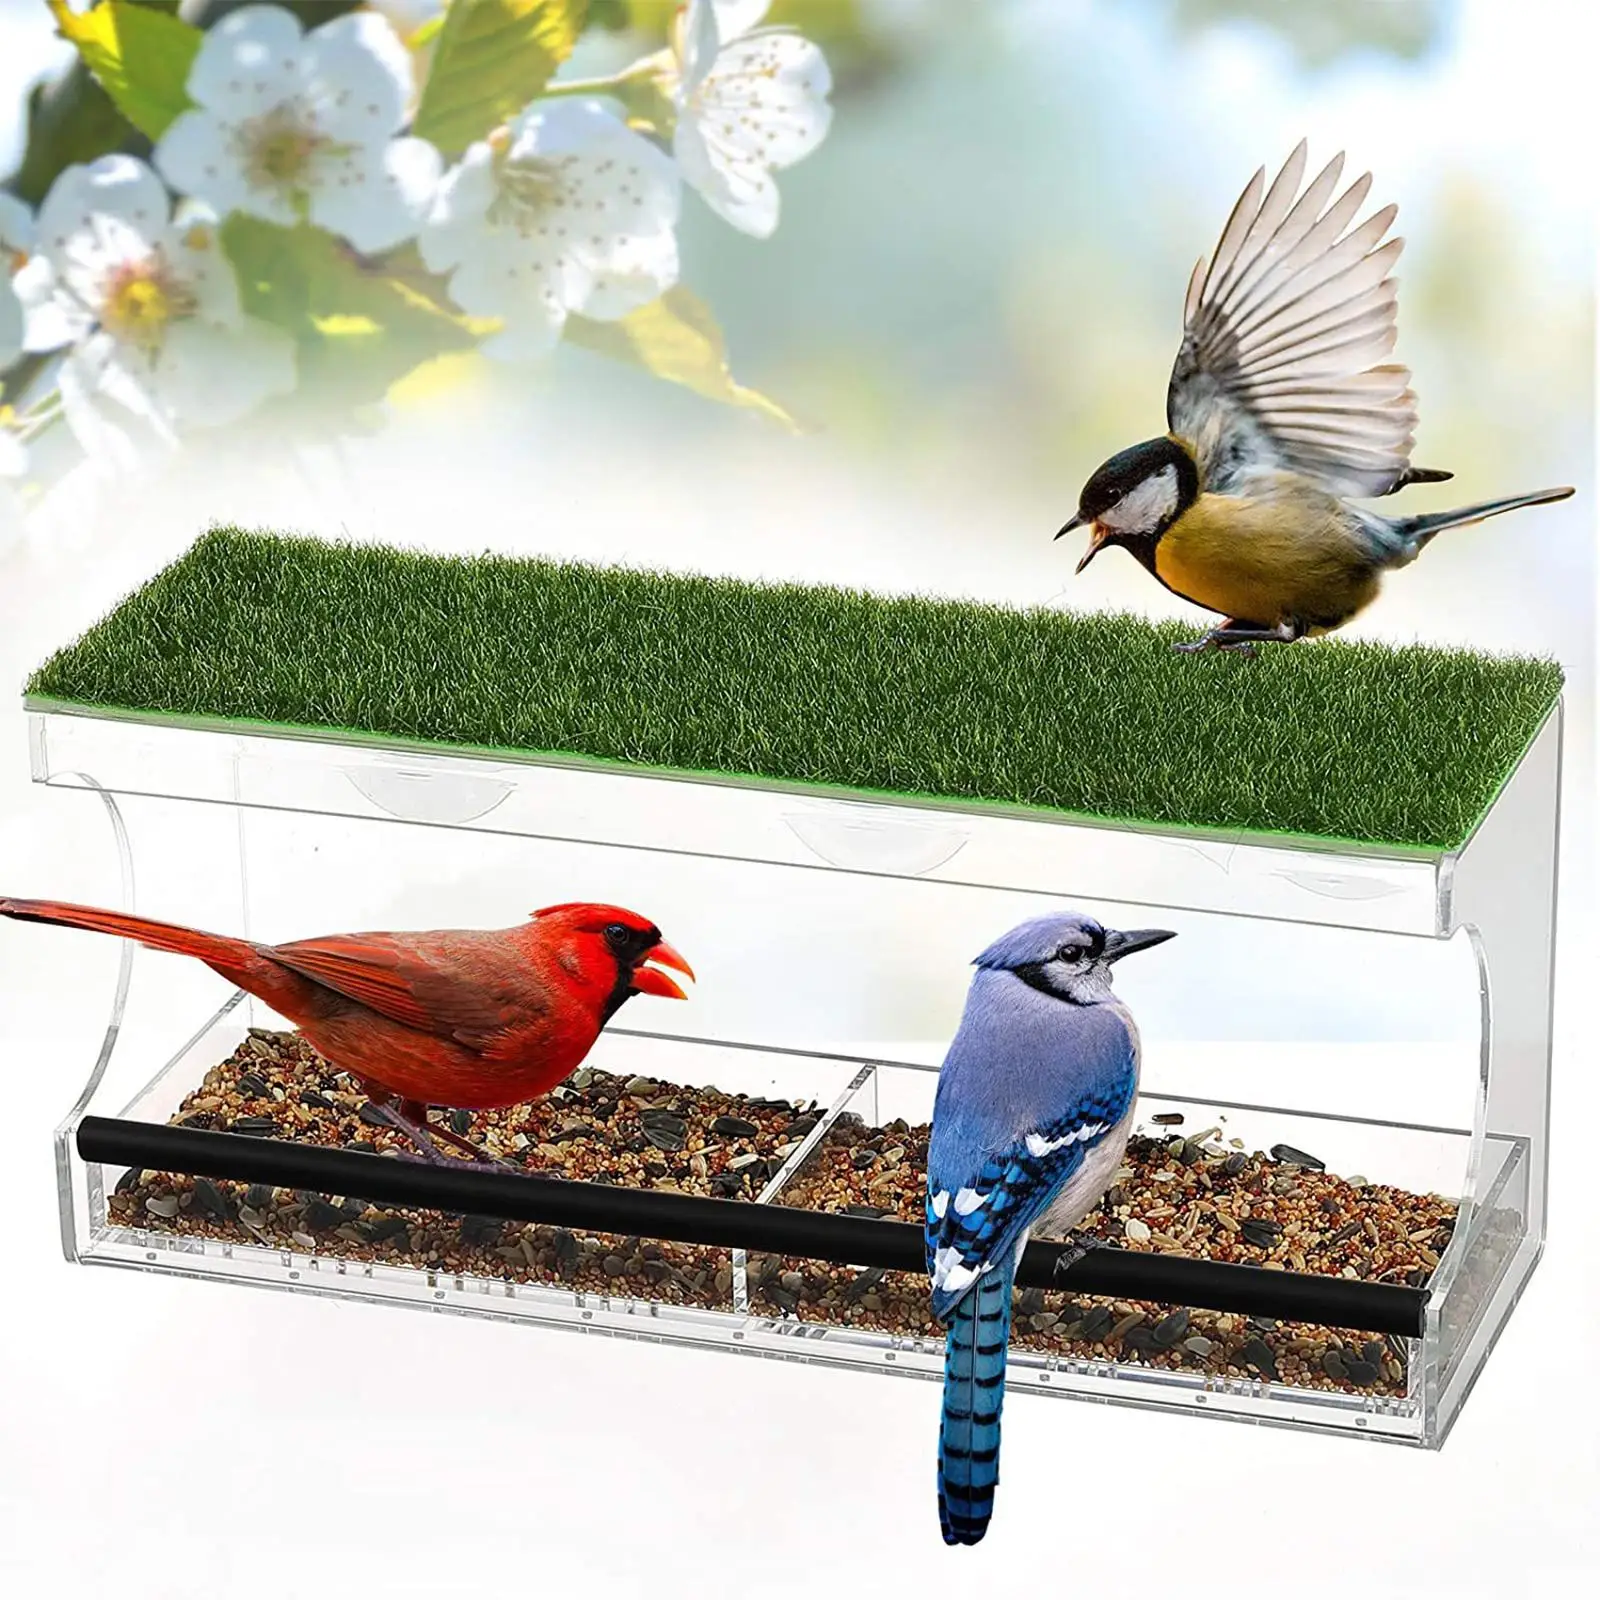 Window Birds Feeder Acrylic Hanger Seed Nut Holder Container Clear Detachable